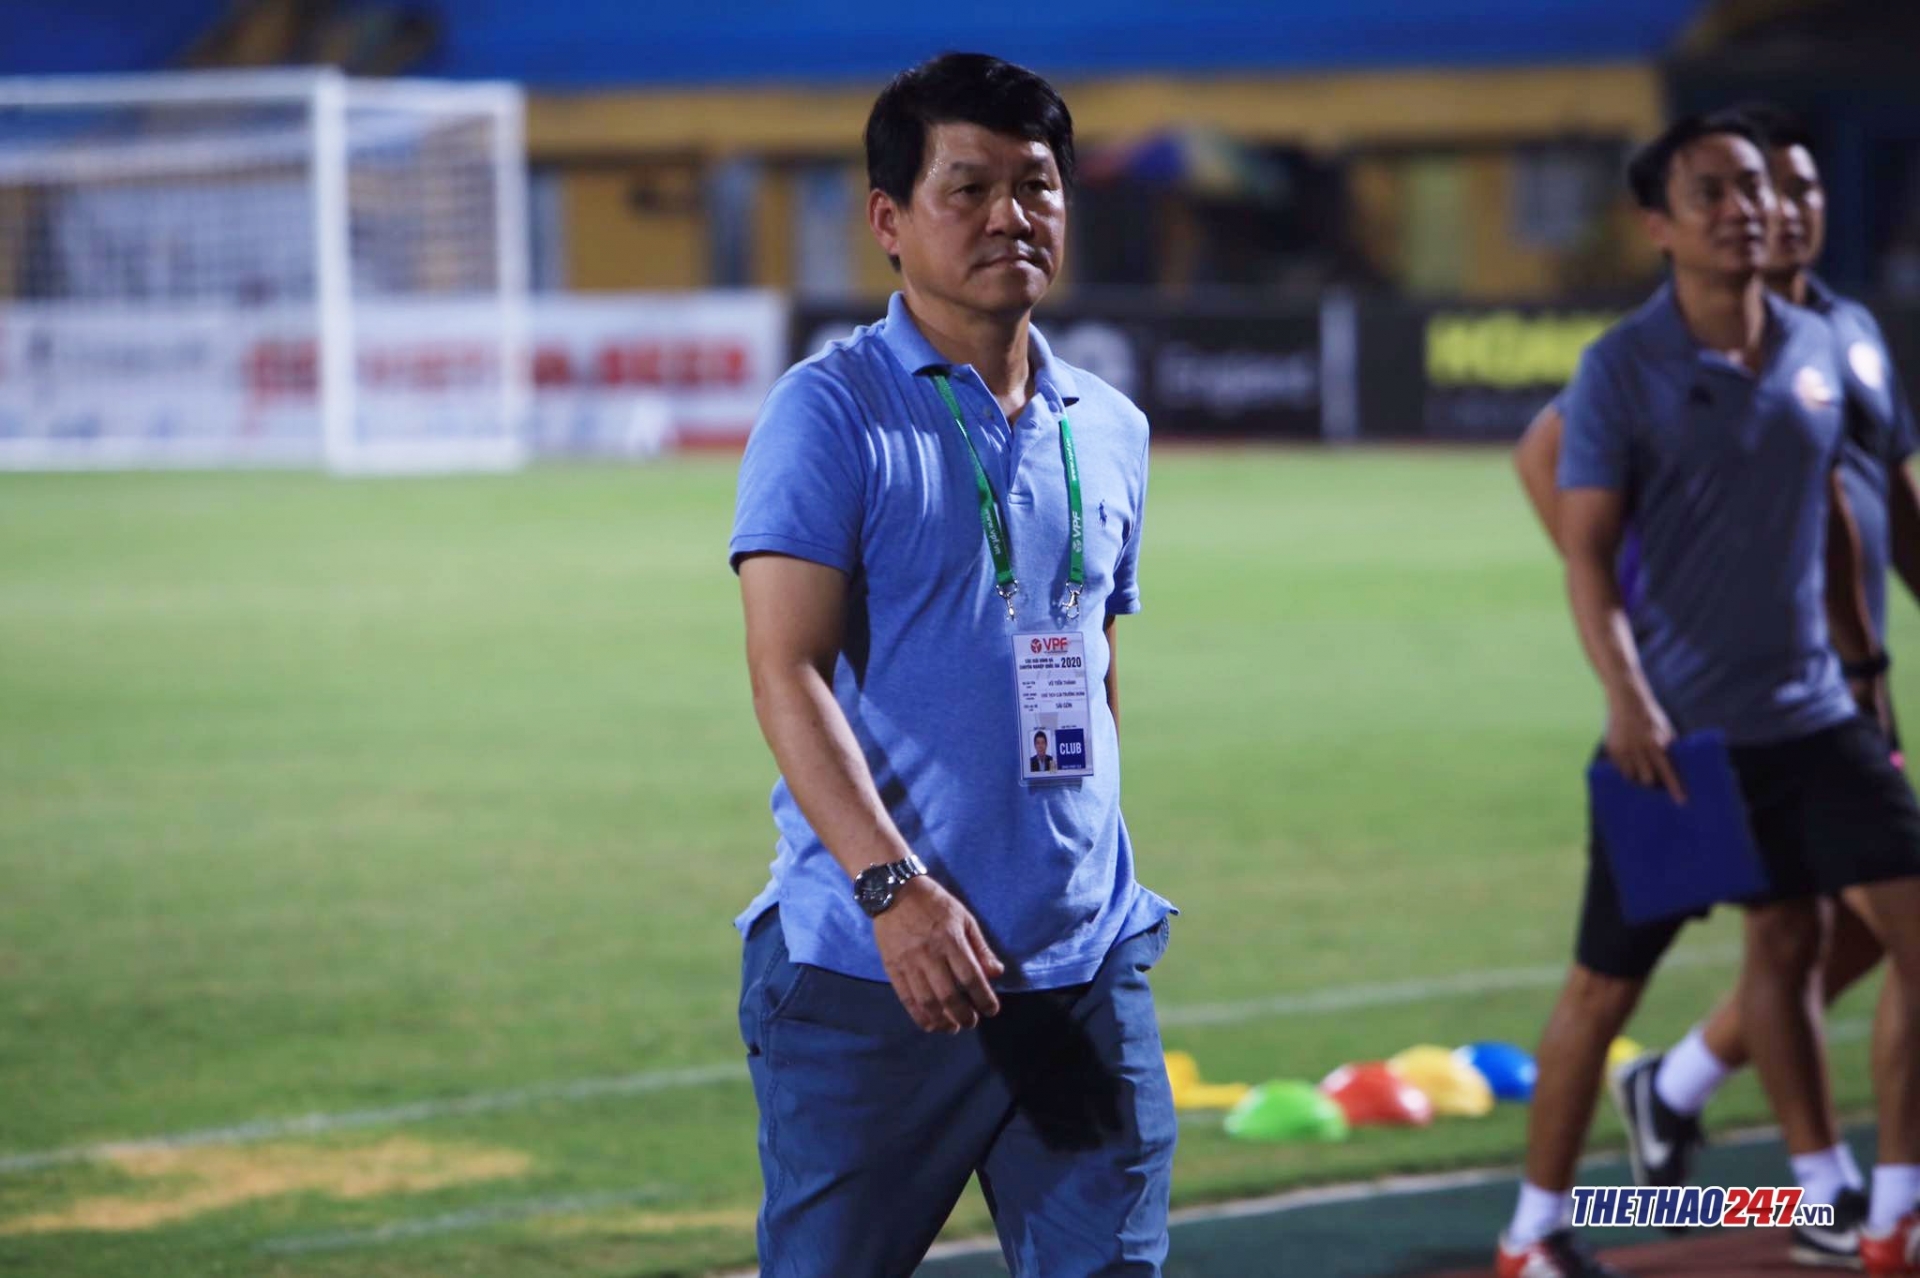 Coach Vu Tien Thanh calm after the game